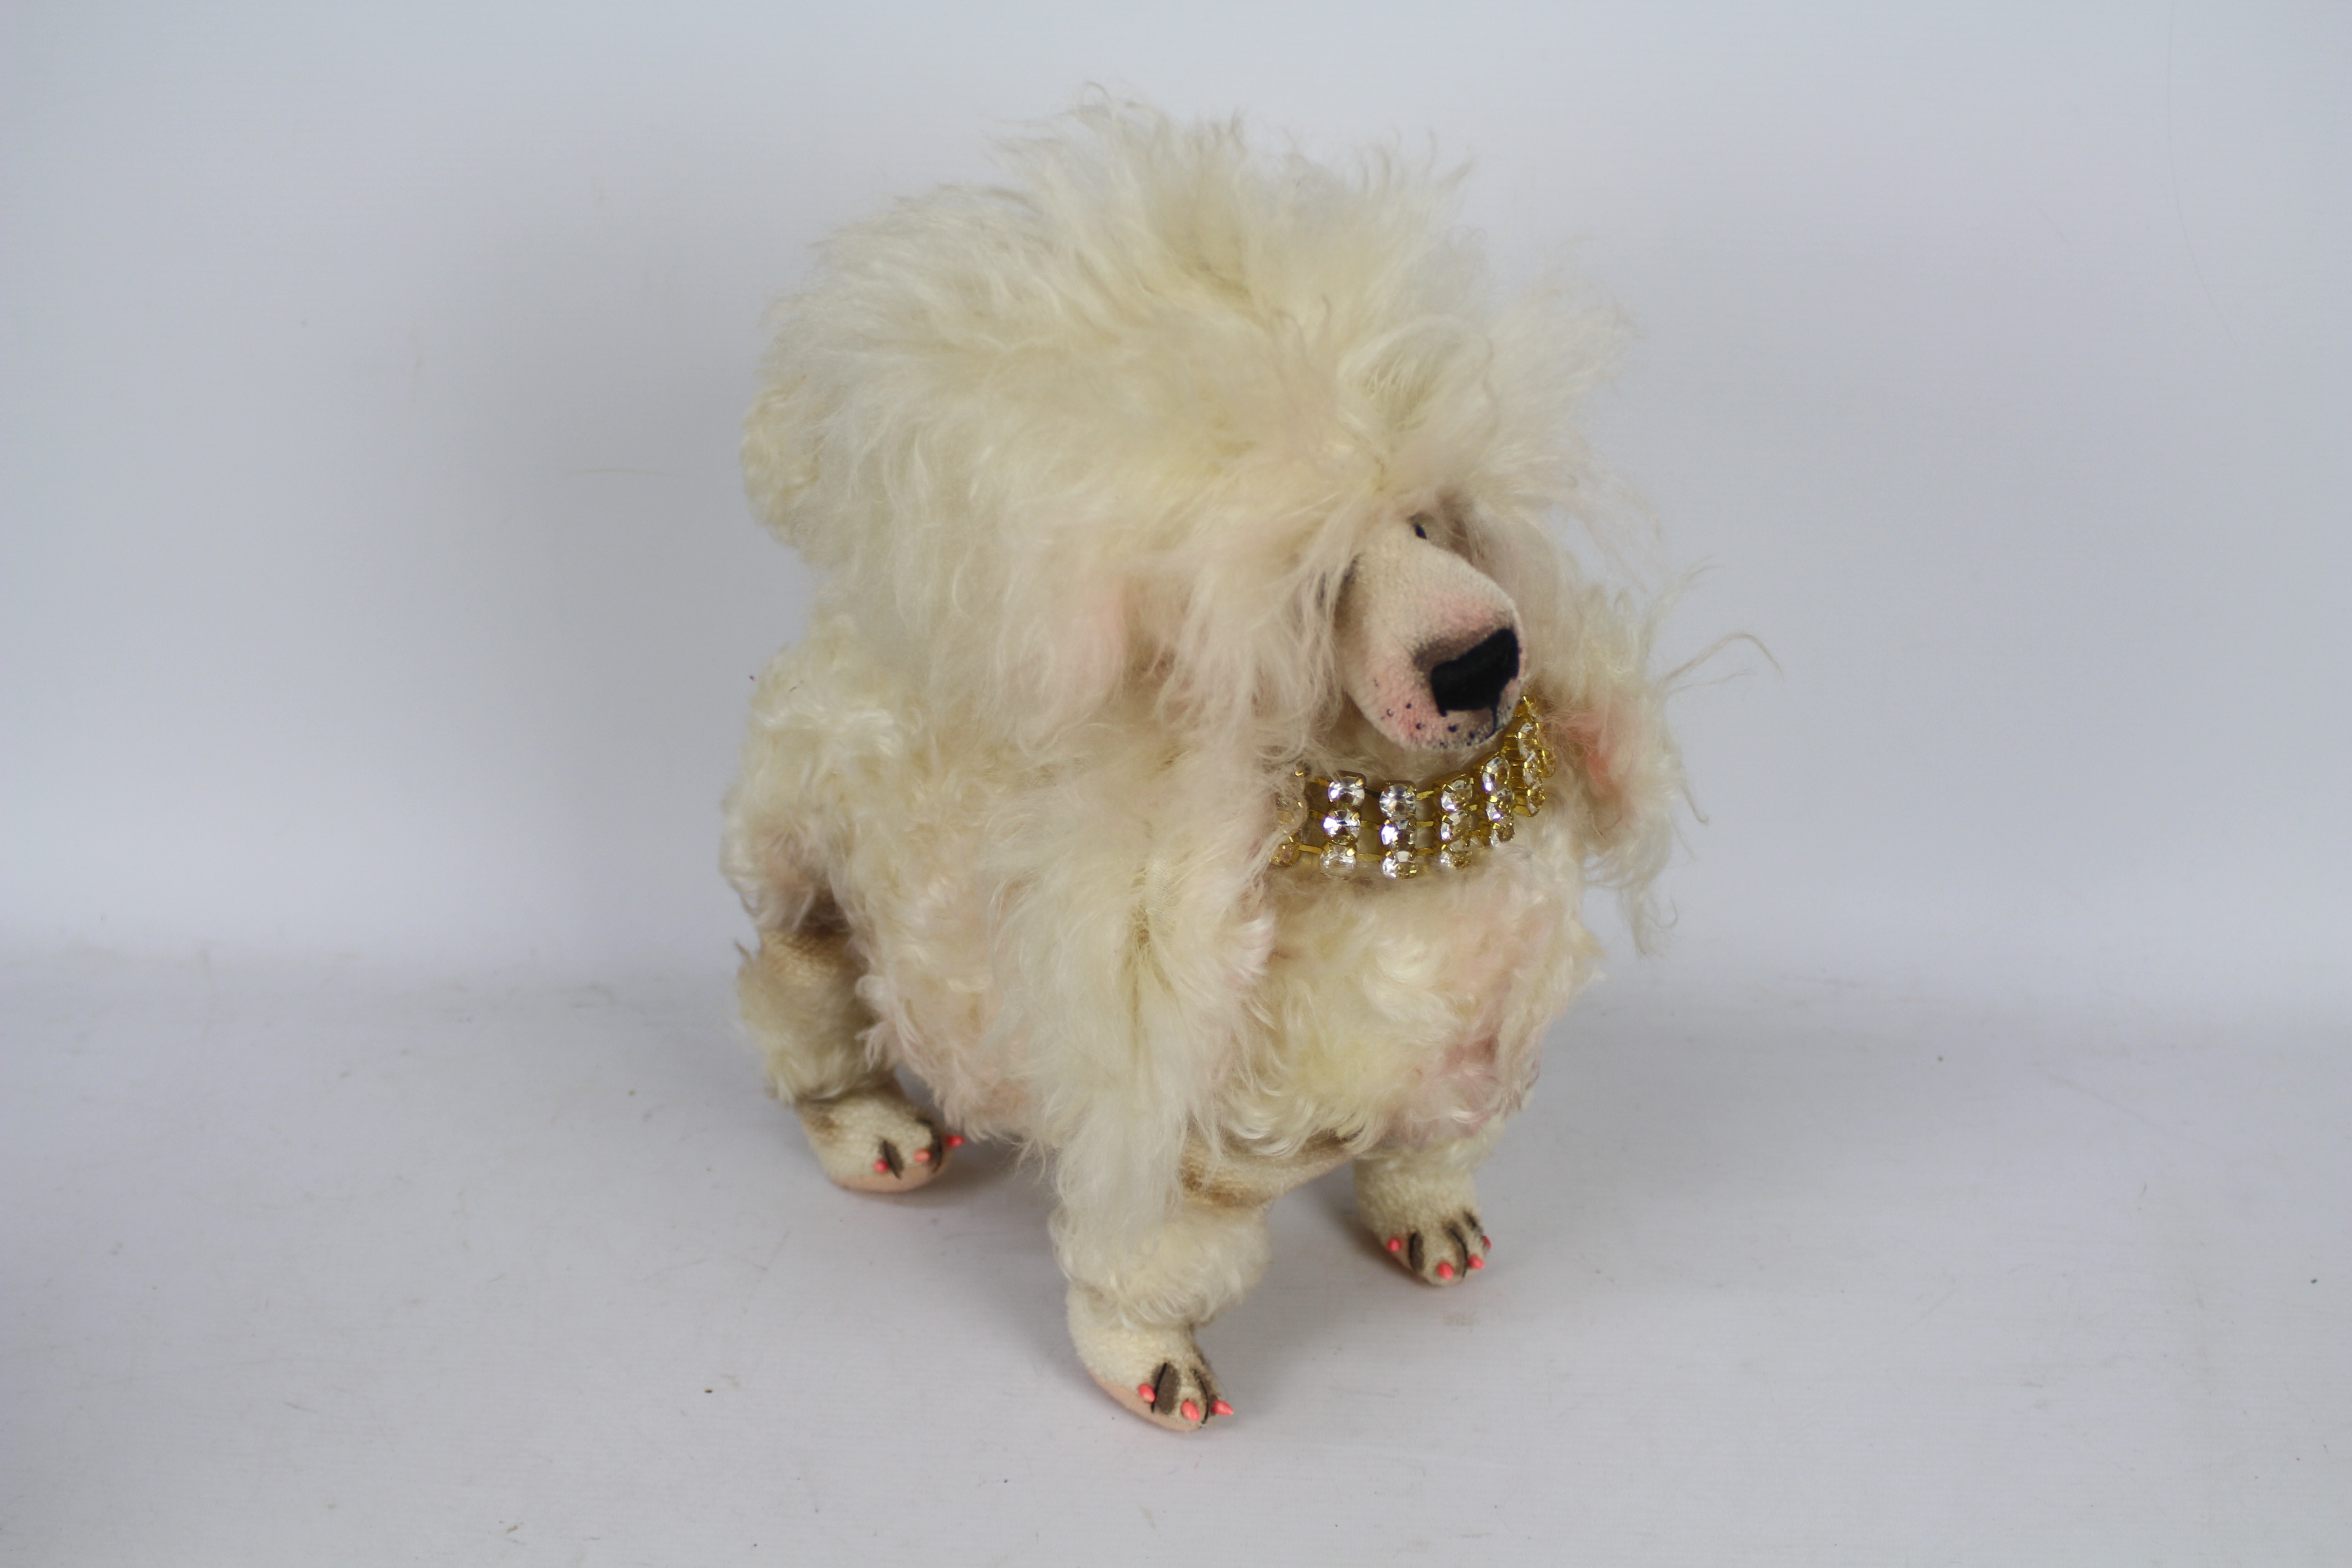 Susan Tautlinger - A mohair miniature Poodle with jointed head made by Susan Tautlinger.